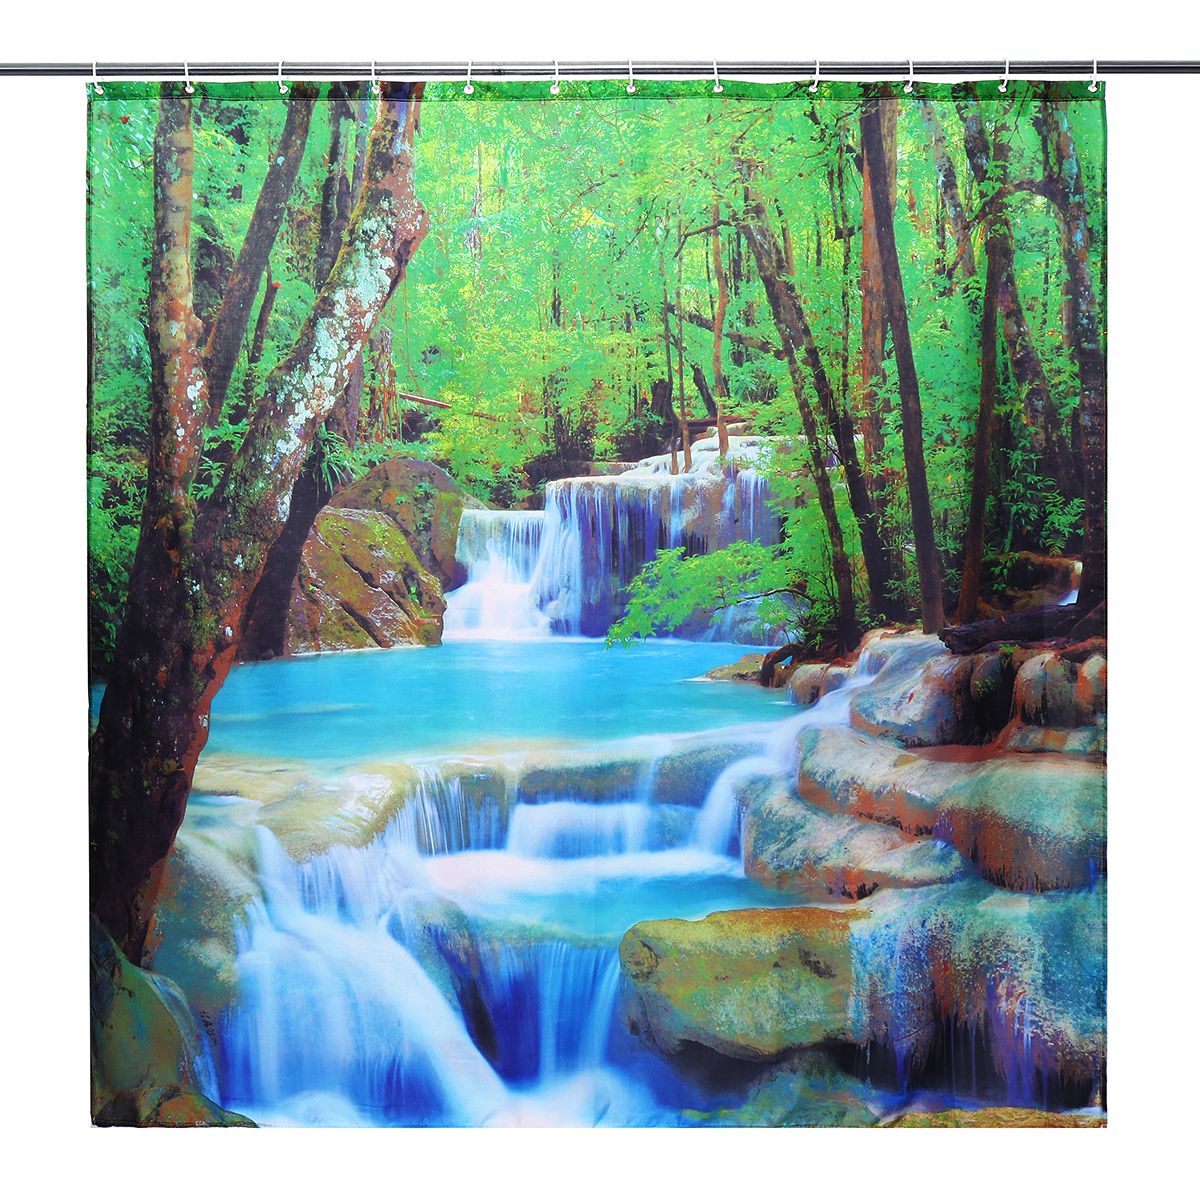 3D-Waterfall-Nature-Scenery-Bath-Shower-Curtain-Water-Resistant-Bathroom-Shield-1452770